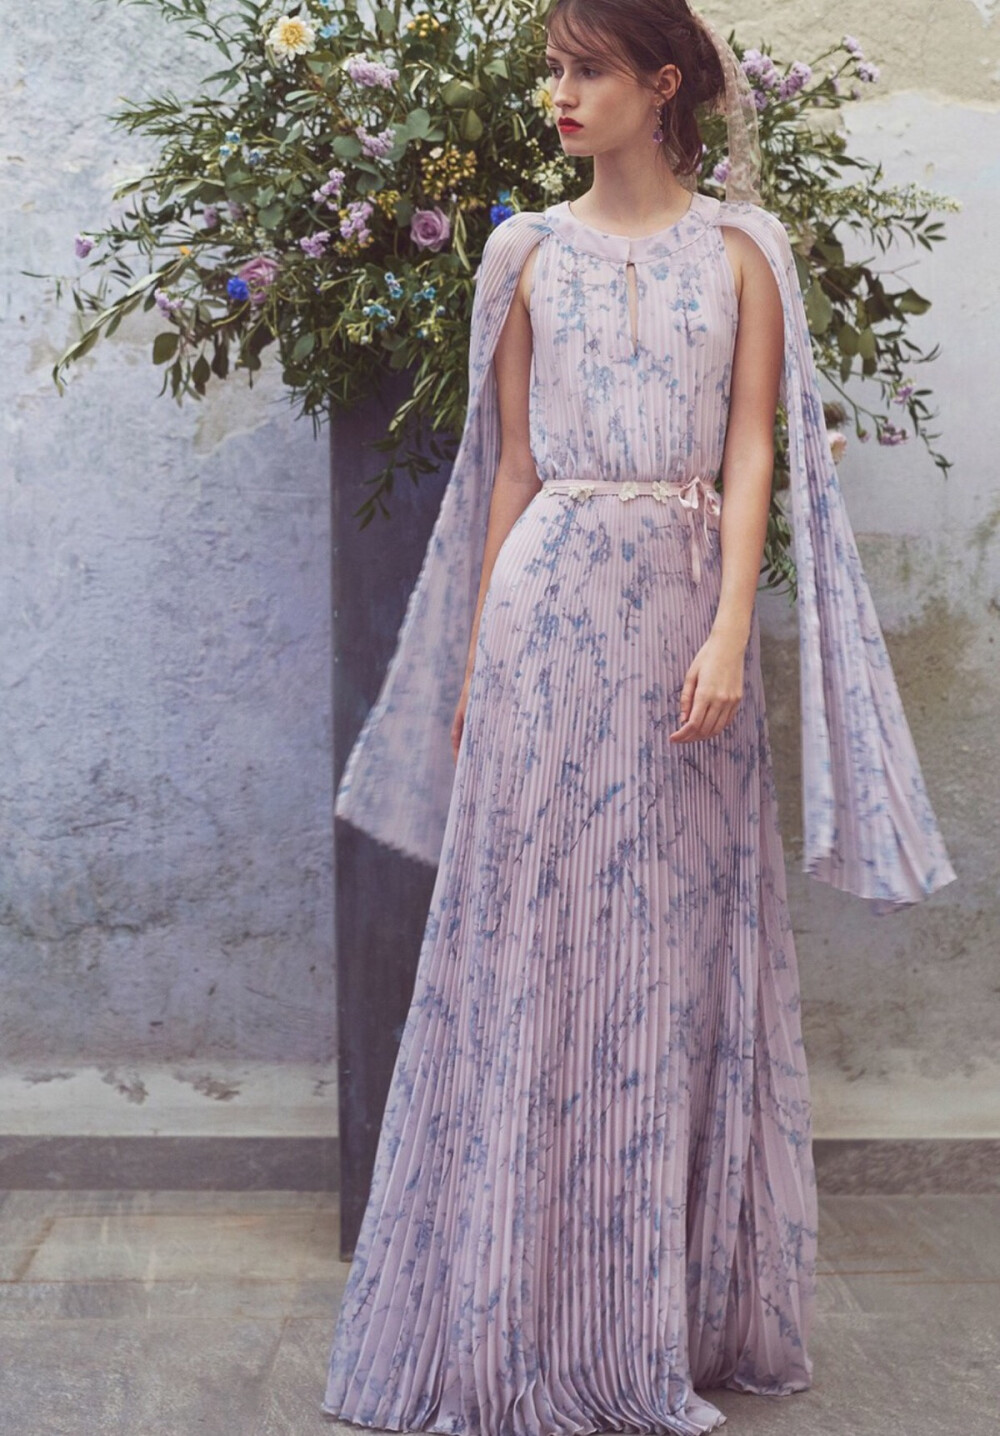 Luisa Beccaria Resort 2018 COLLECTION